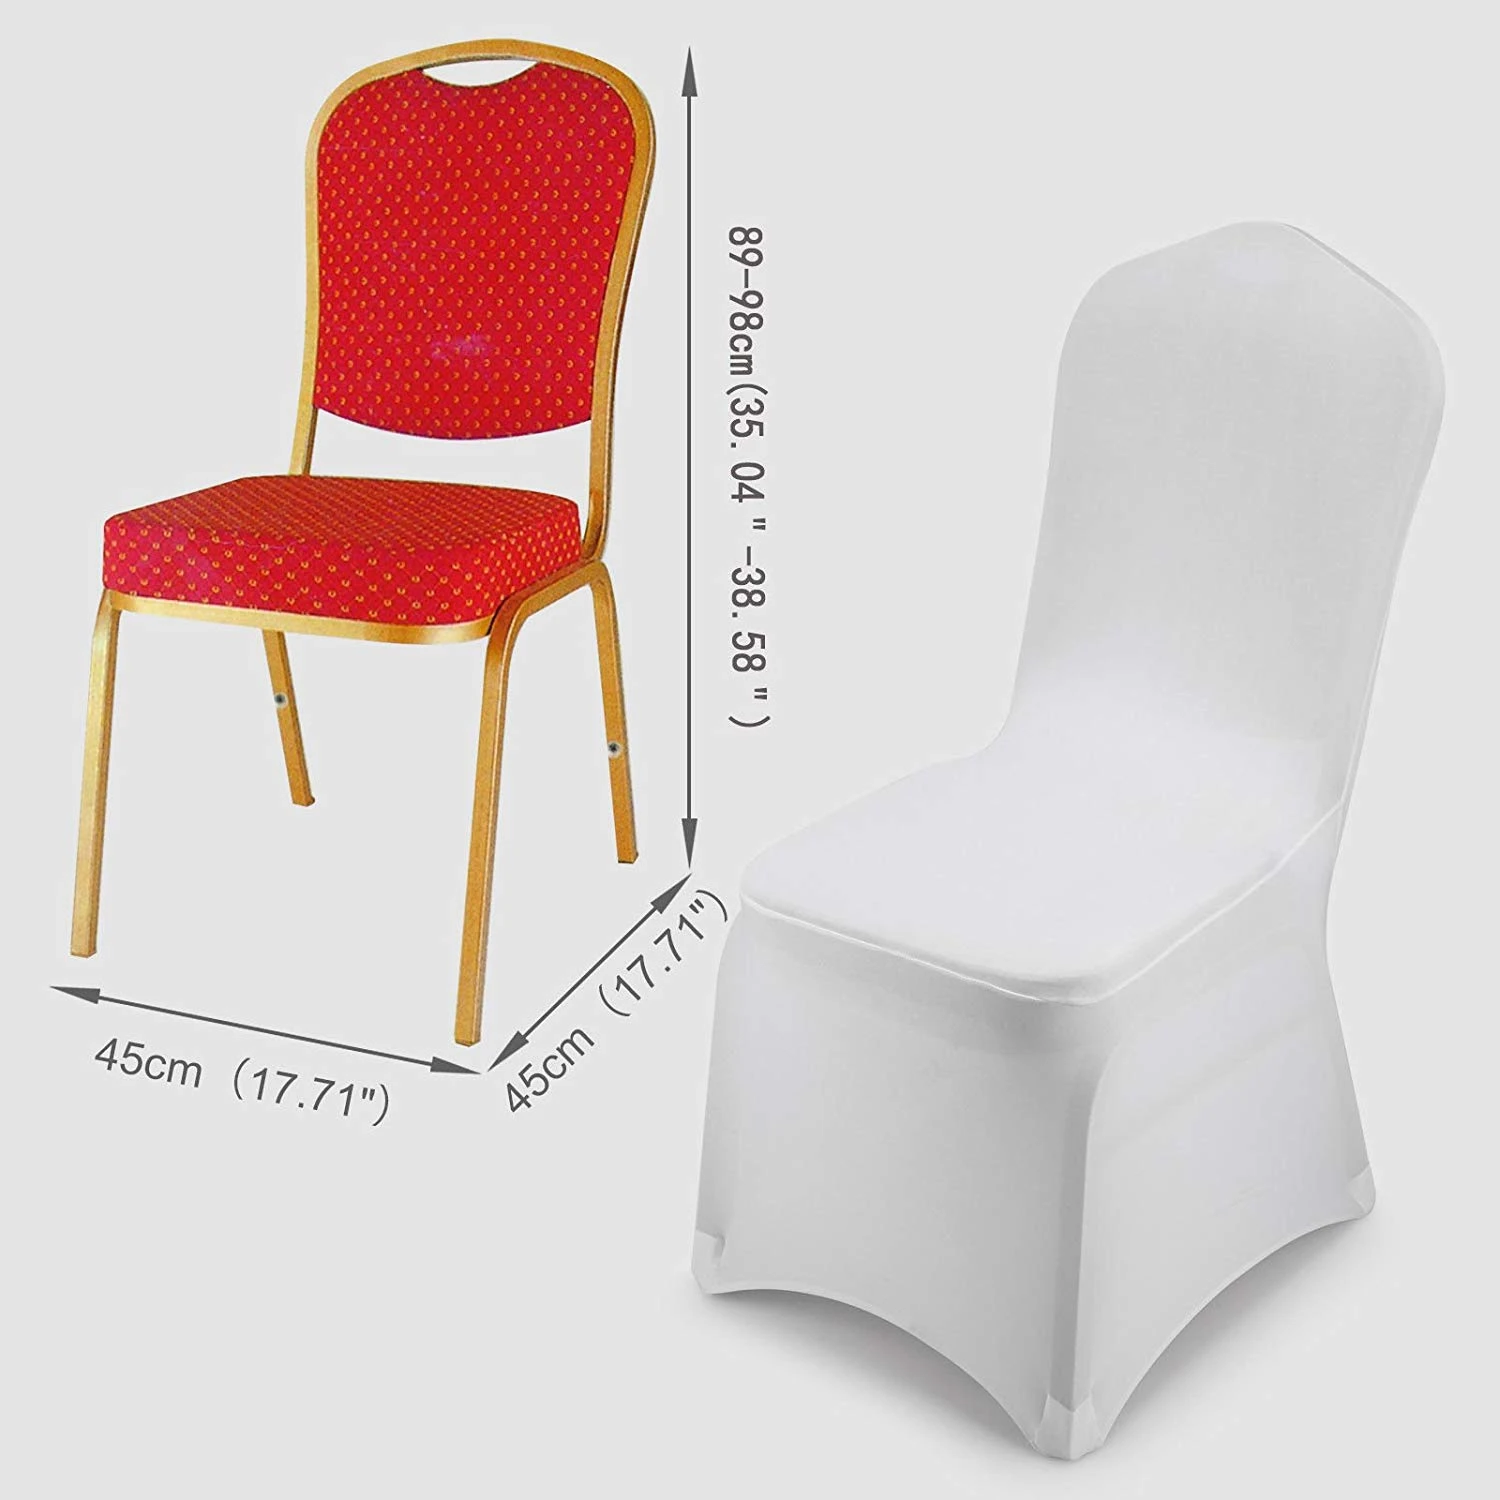 Modern Hot Sale Elastic Blue Spandex Chair Covers Folding Chair For Banquet Event Decorative Stretch Folding Chair Covers